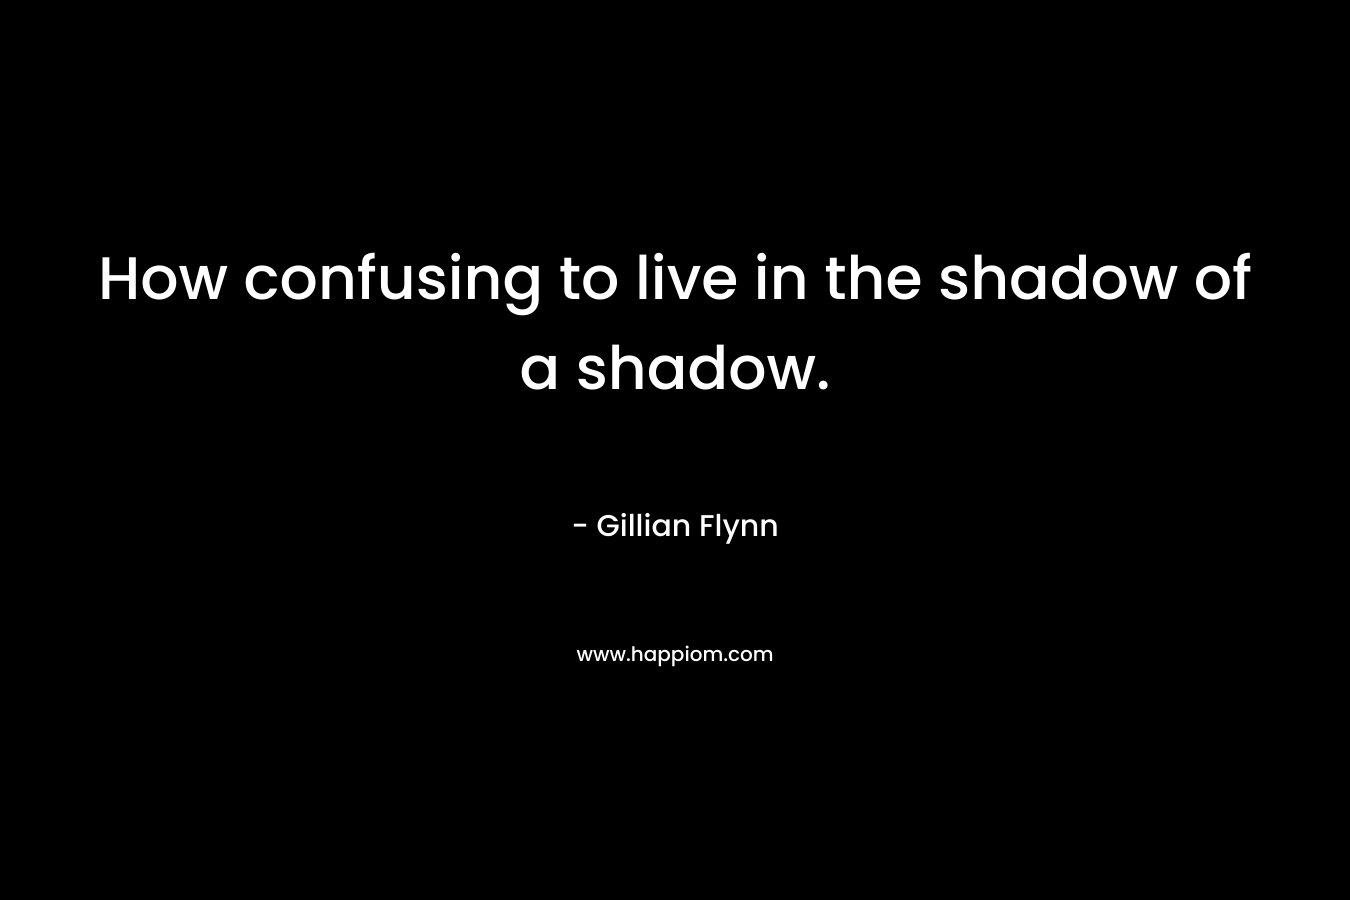 How confusing to live in the shadow of a shadow.